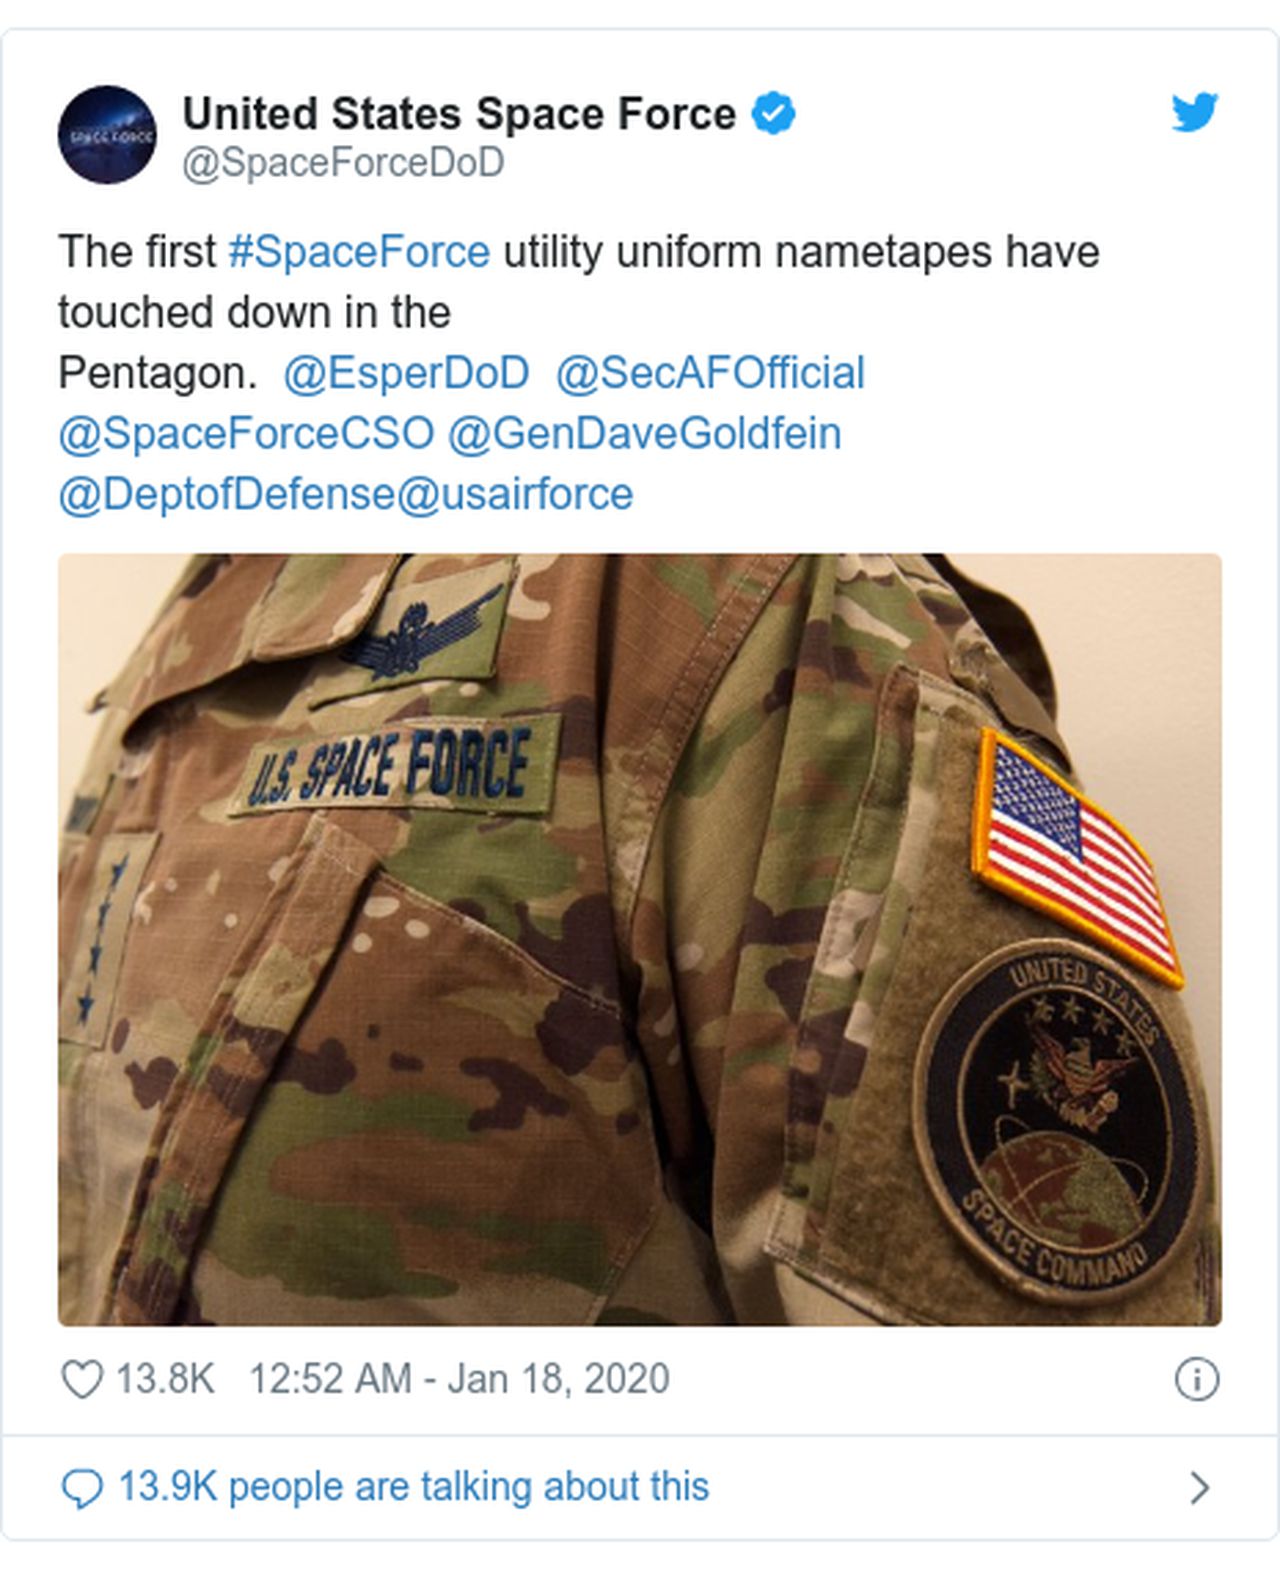 Social media reactions to the uniform have mostly just questioned the design, image via Twitter